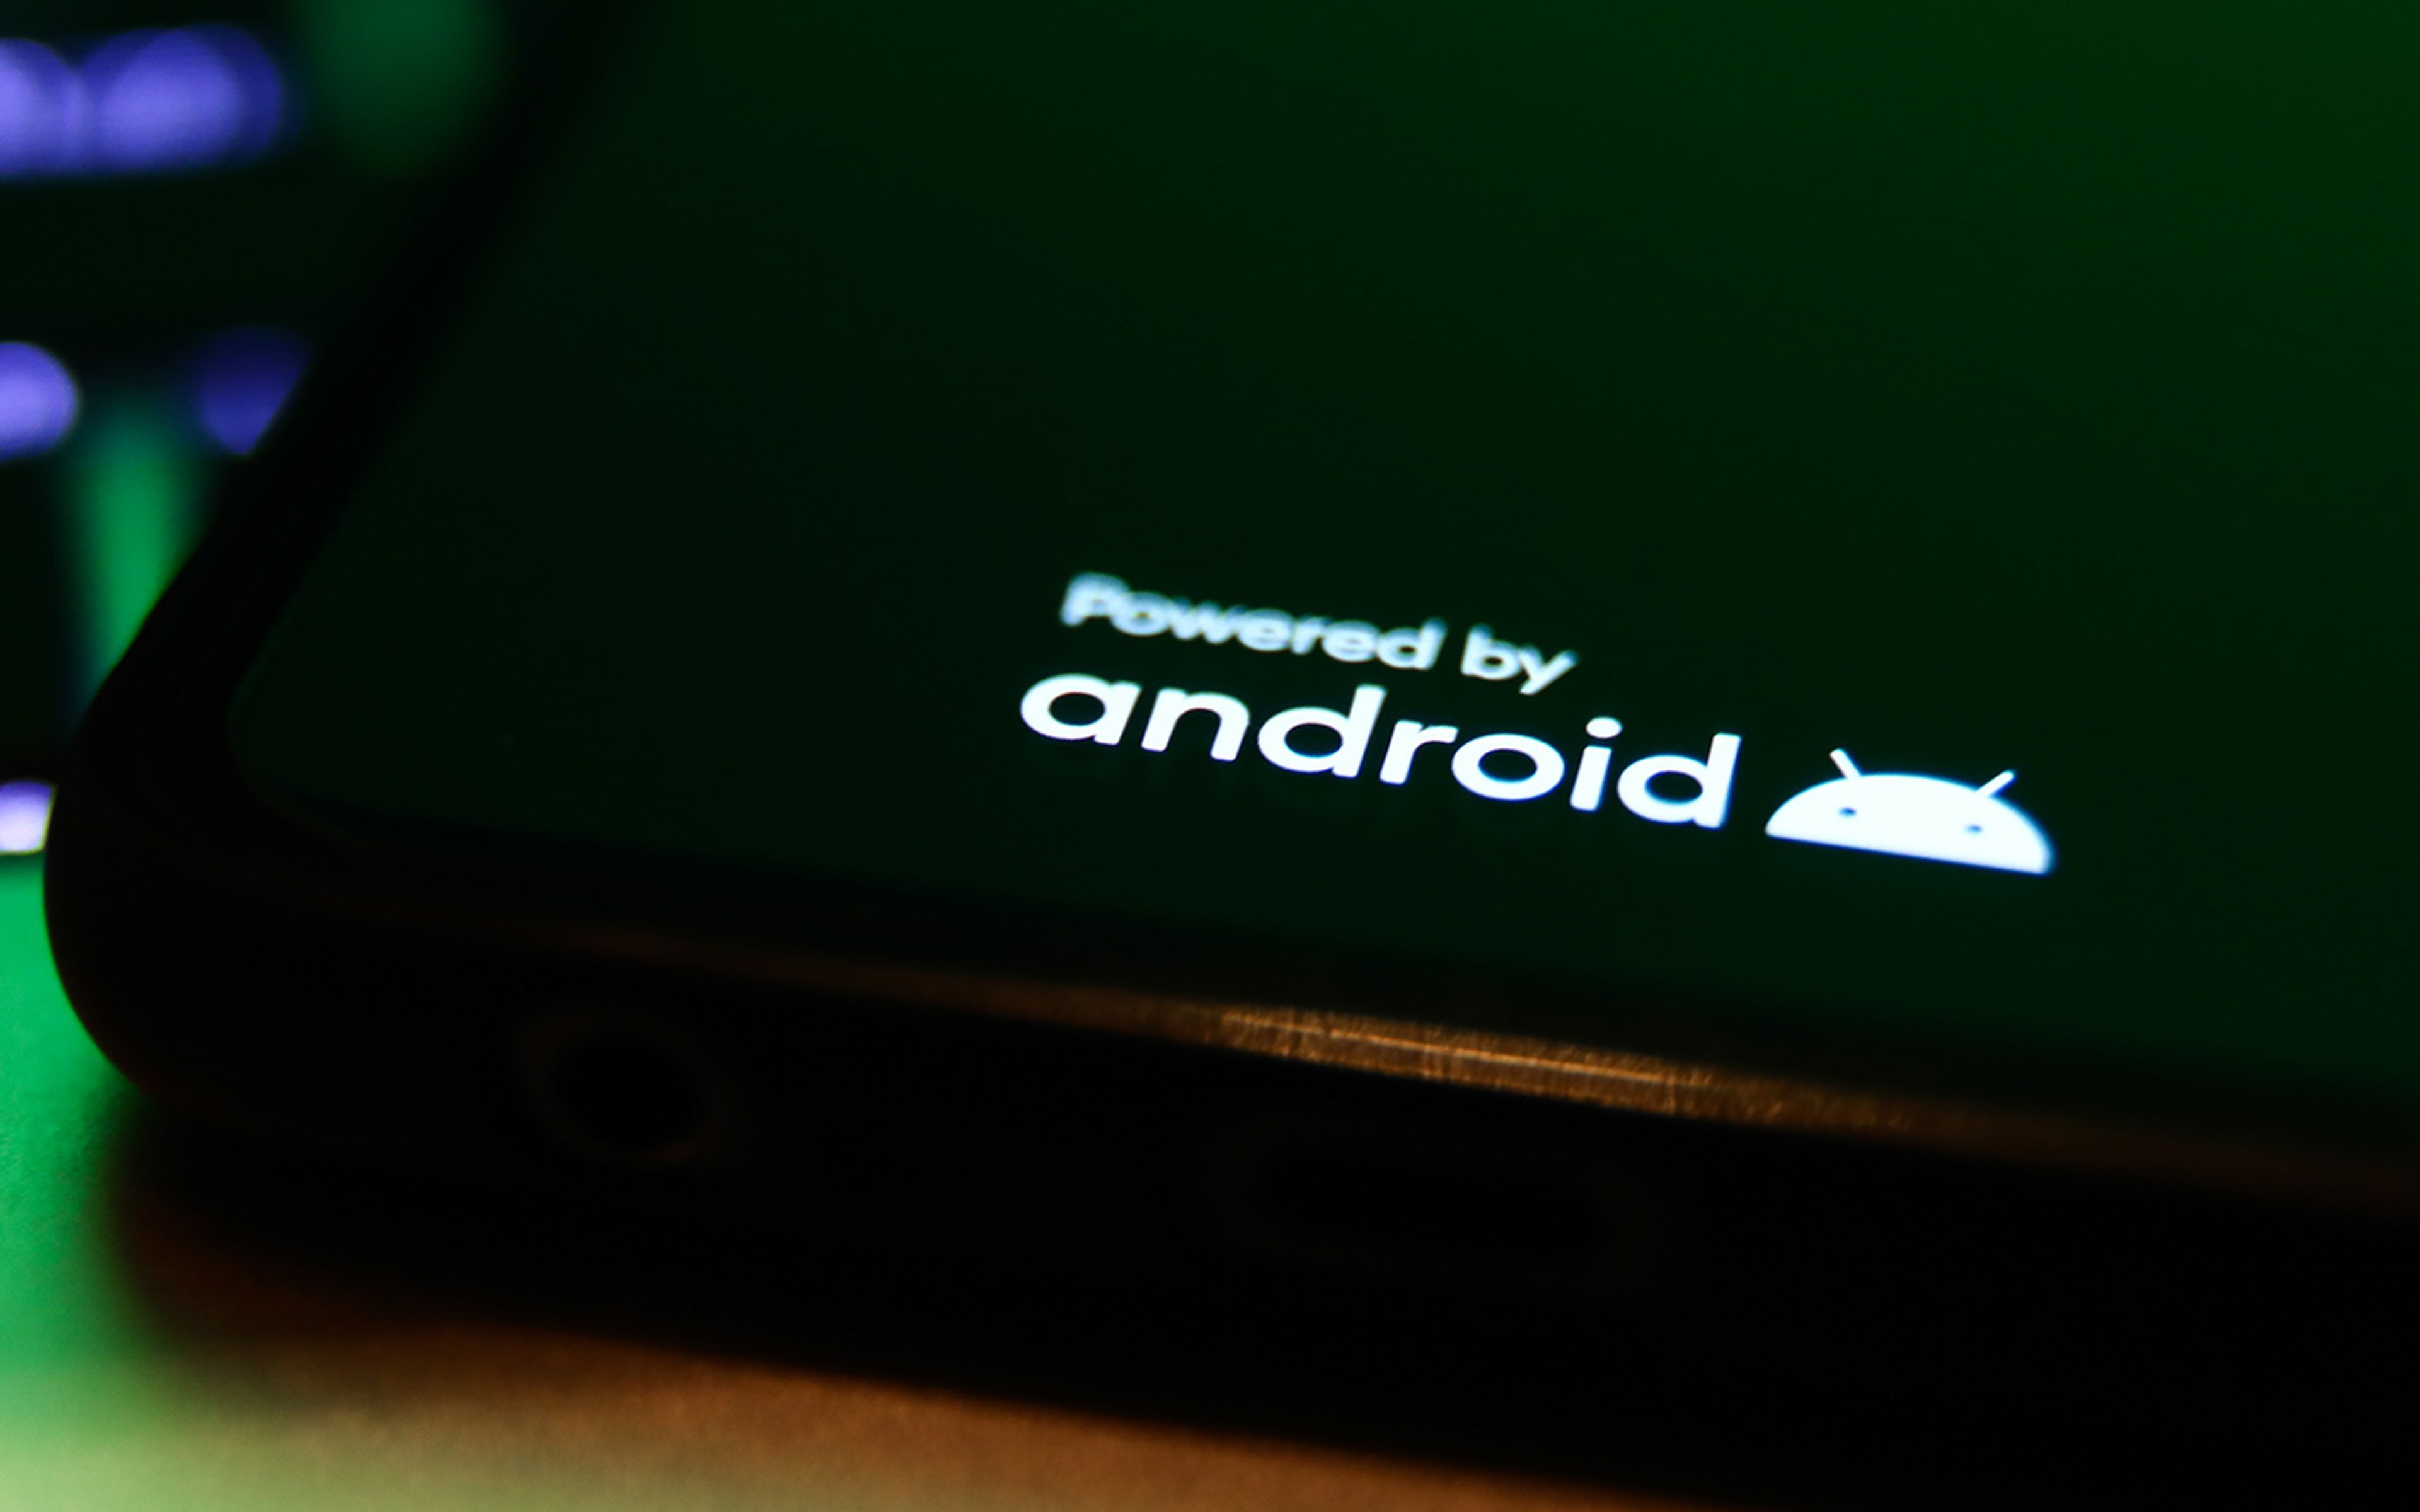 Android logo displayed on a phone screen